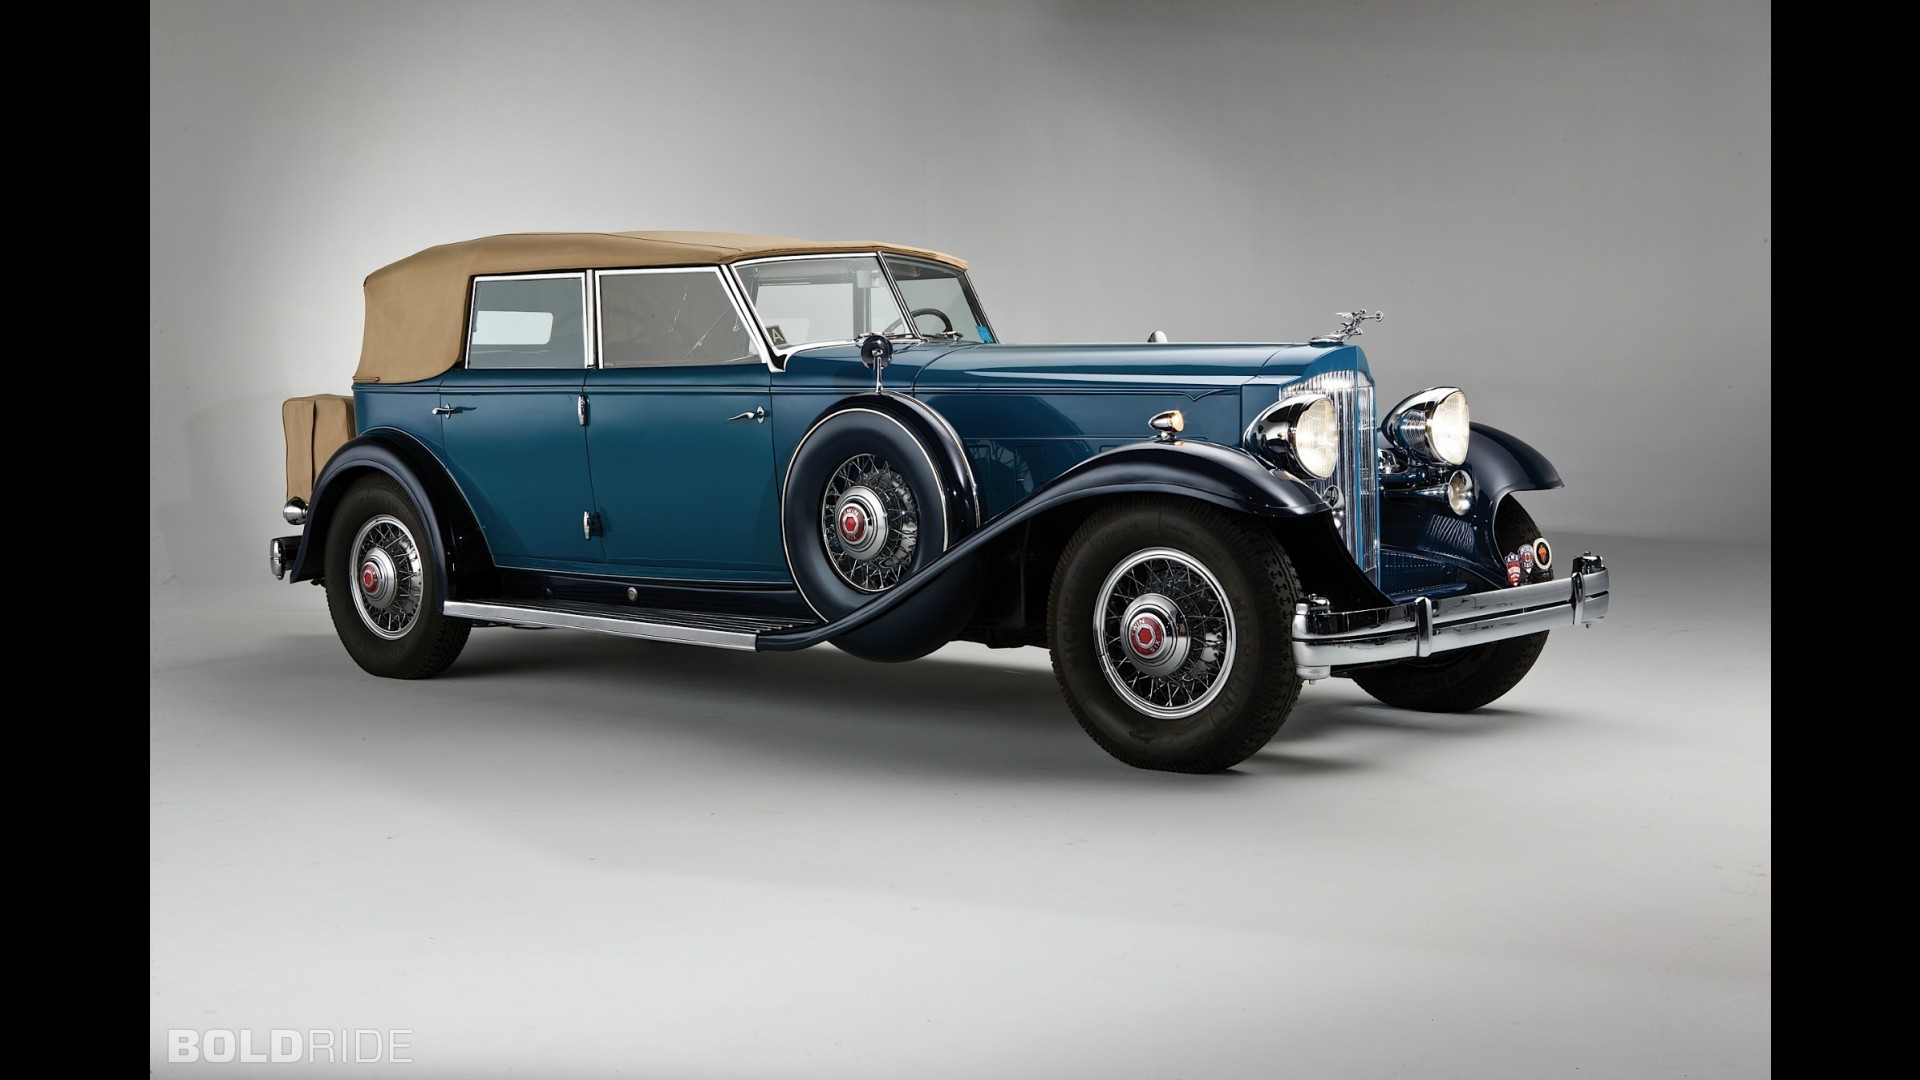 HD Quality Wallpaper | Collection: Vehicles, 1920x1080 1939 Packard 12 Cylinder Sedan Convertible